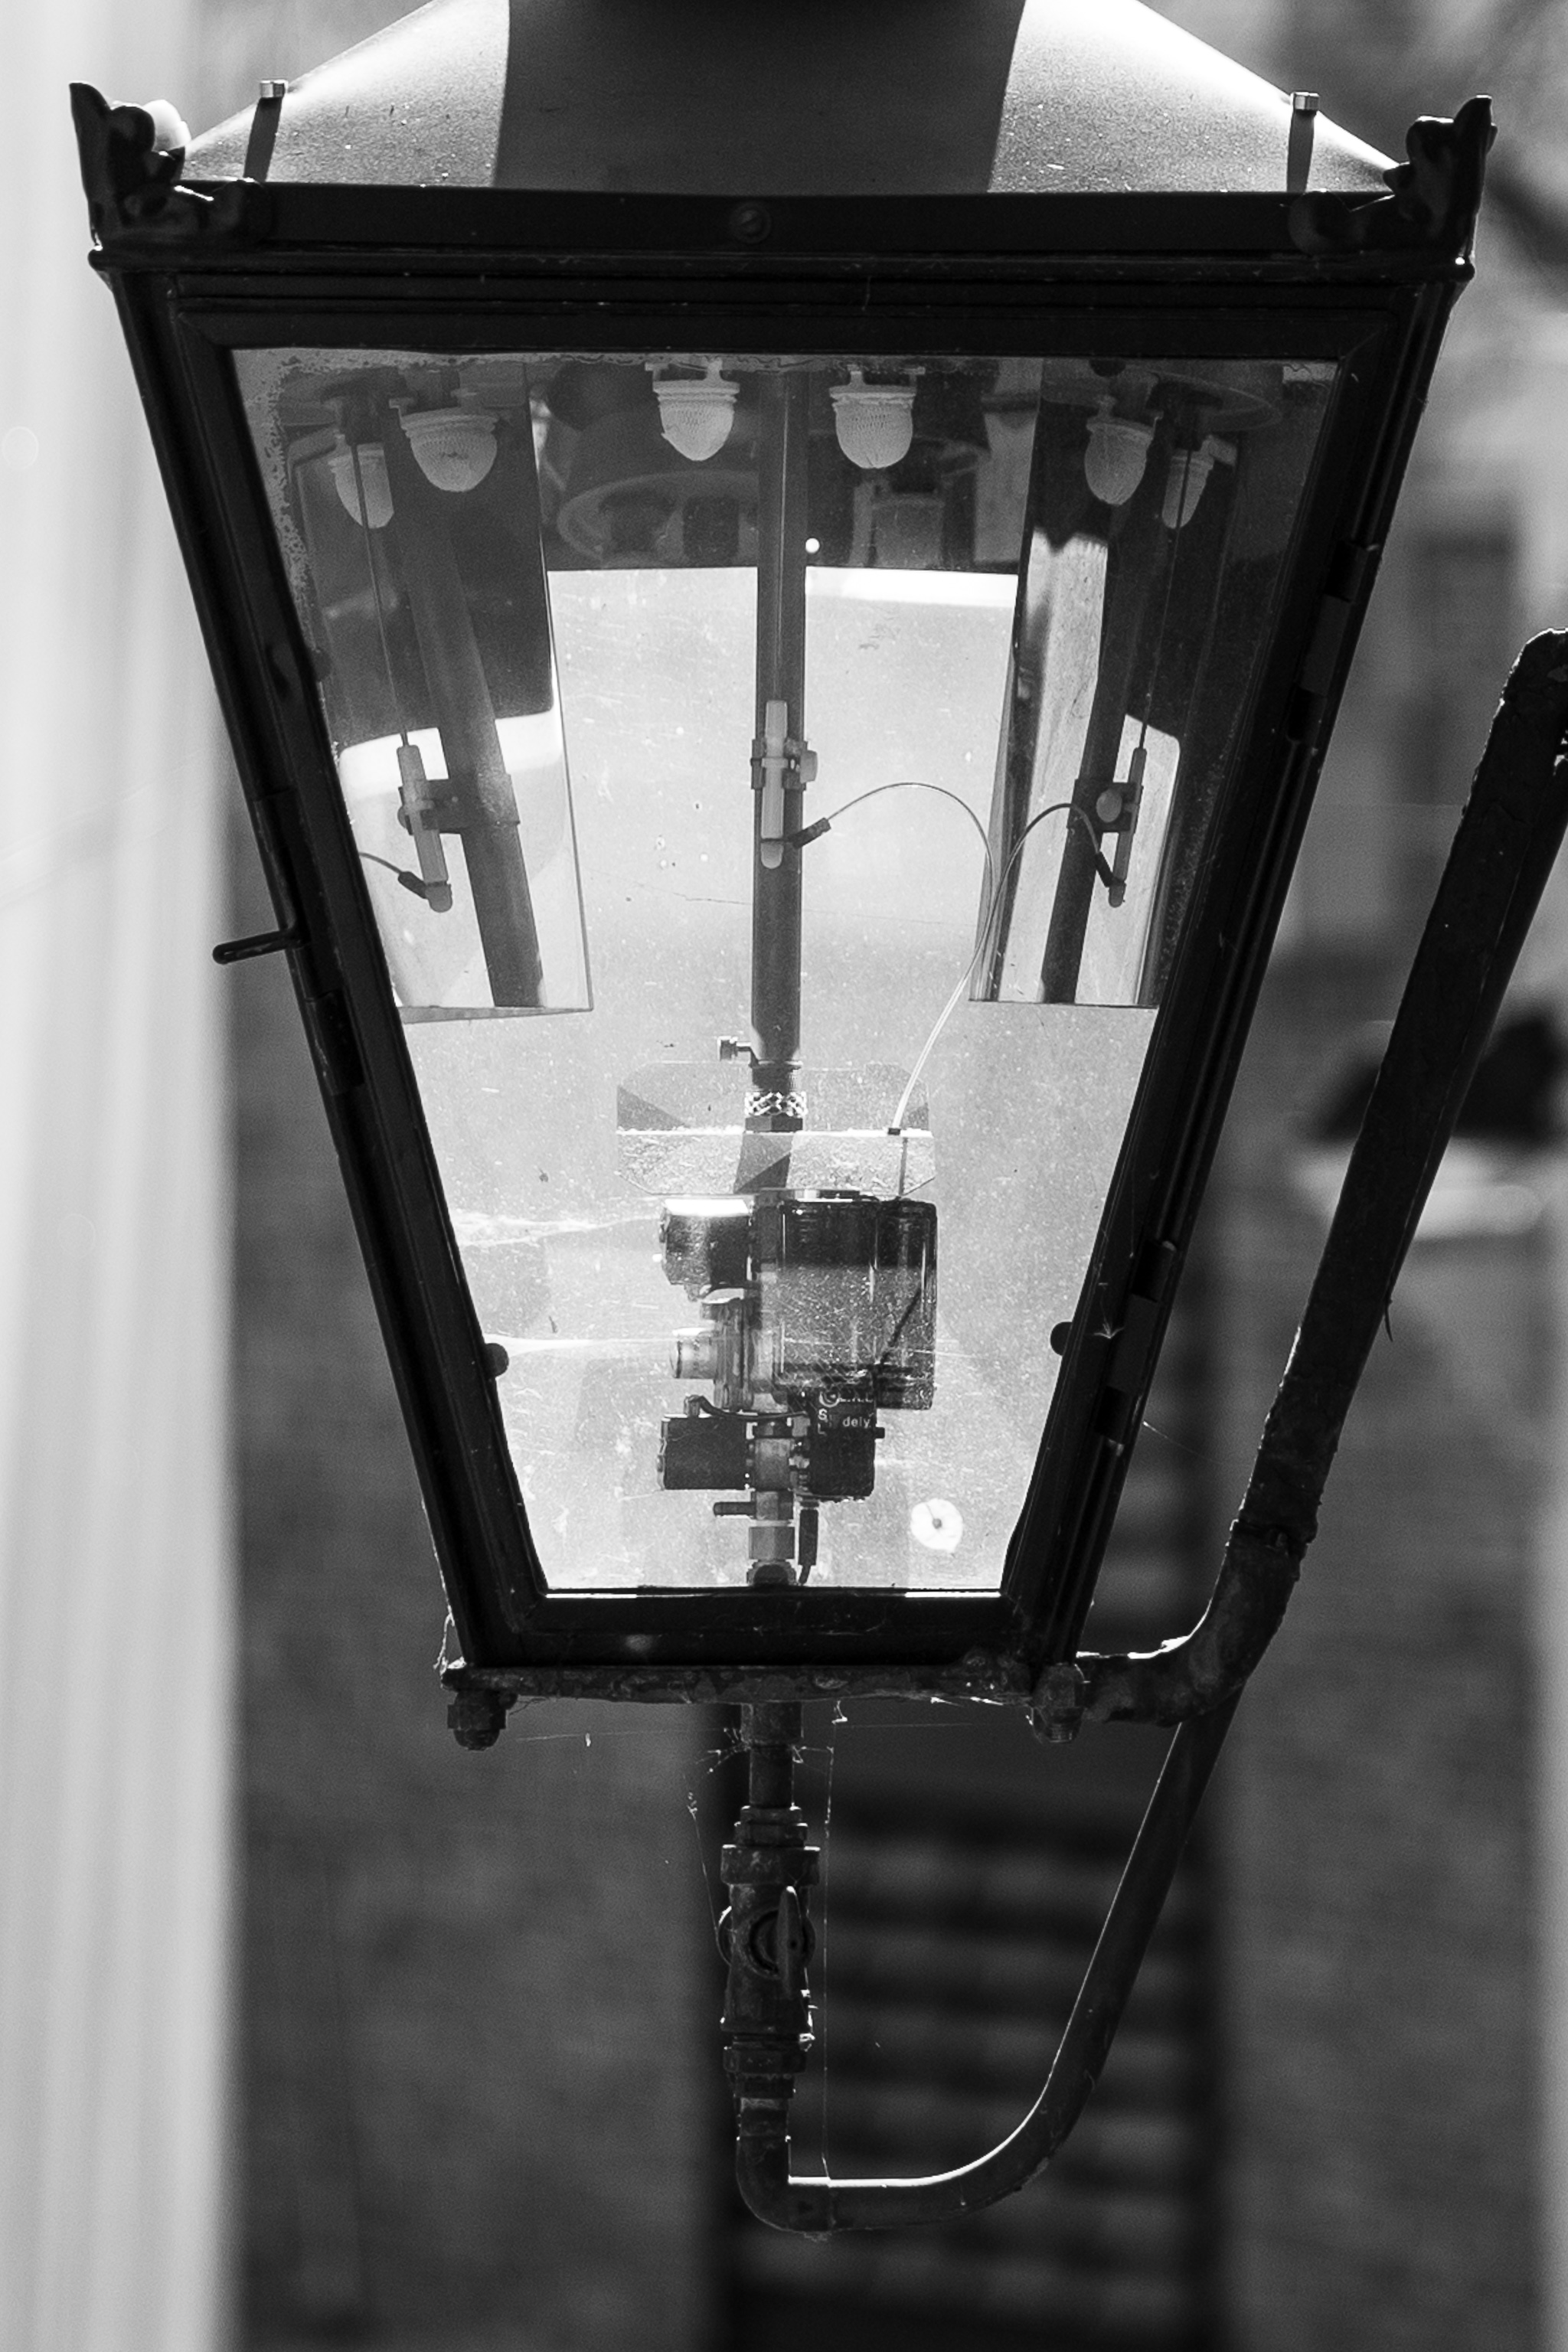 Converted
There's clearly quite a lot of technology in a street lamp these days. Interesting that you can still see the gas tap at the bottom from the origin...